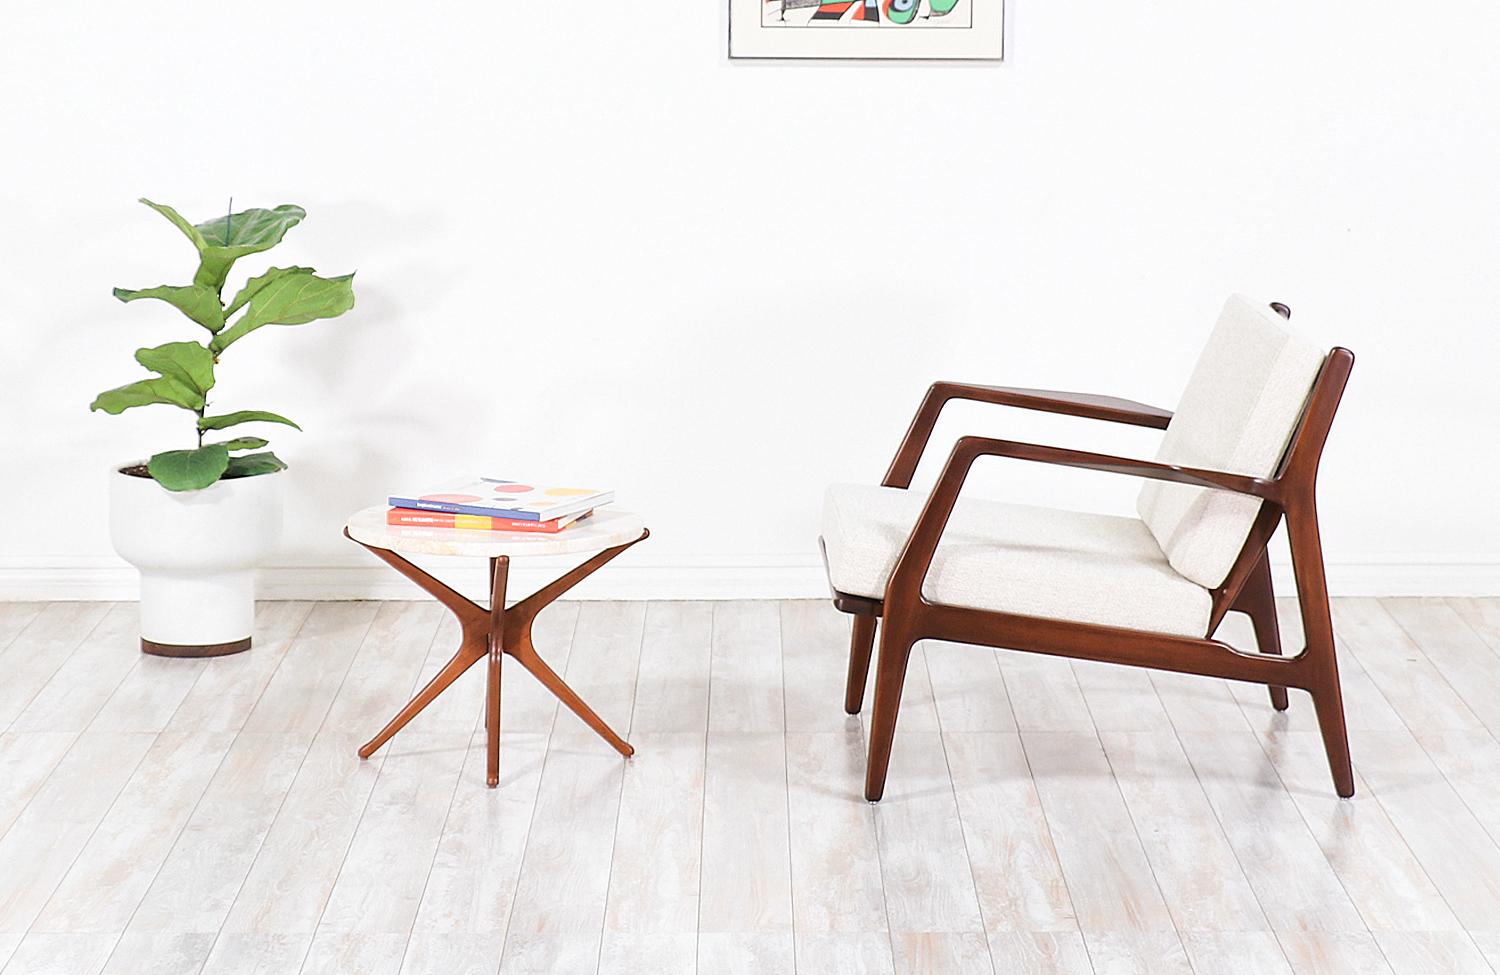 Stylish lounge chair designed by Ib Kofod-Larsen for Selig in Denmark circa 1960s. This sleek and ergonomic lounge chair features a sturdy walnut-stained beech-wood frame with angled legs and a sculptural slatted back that is held in place by bowed